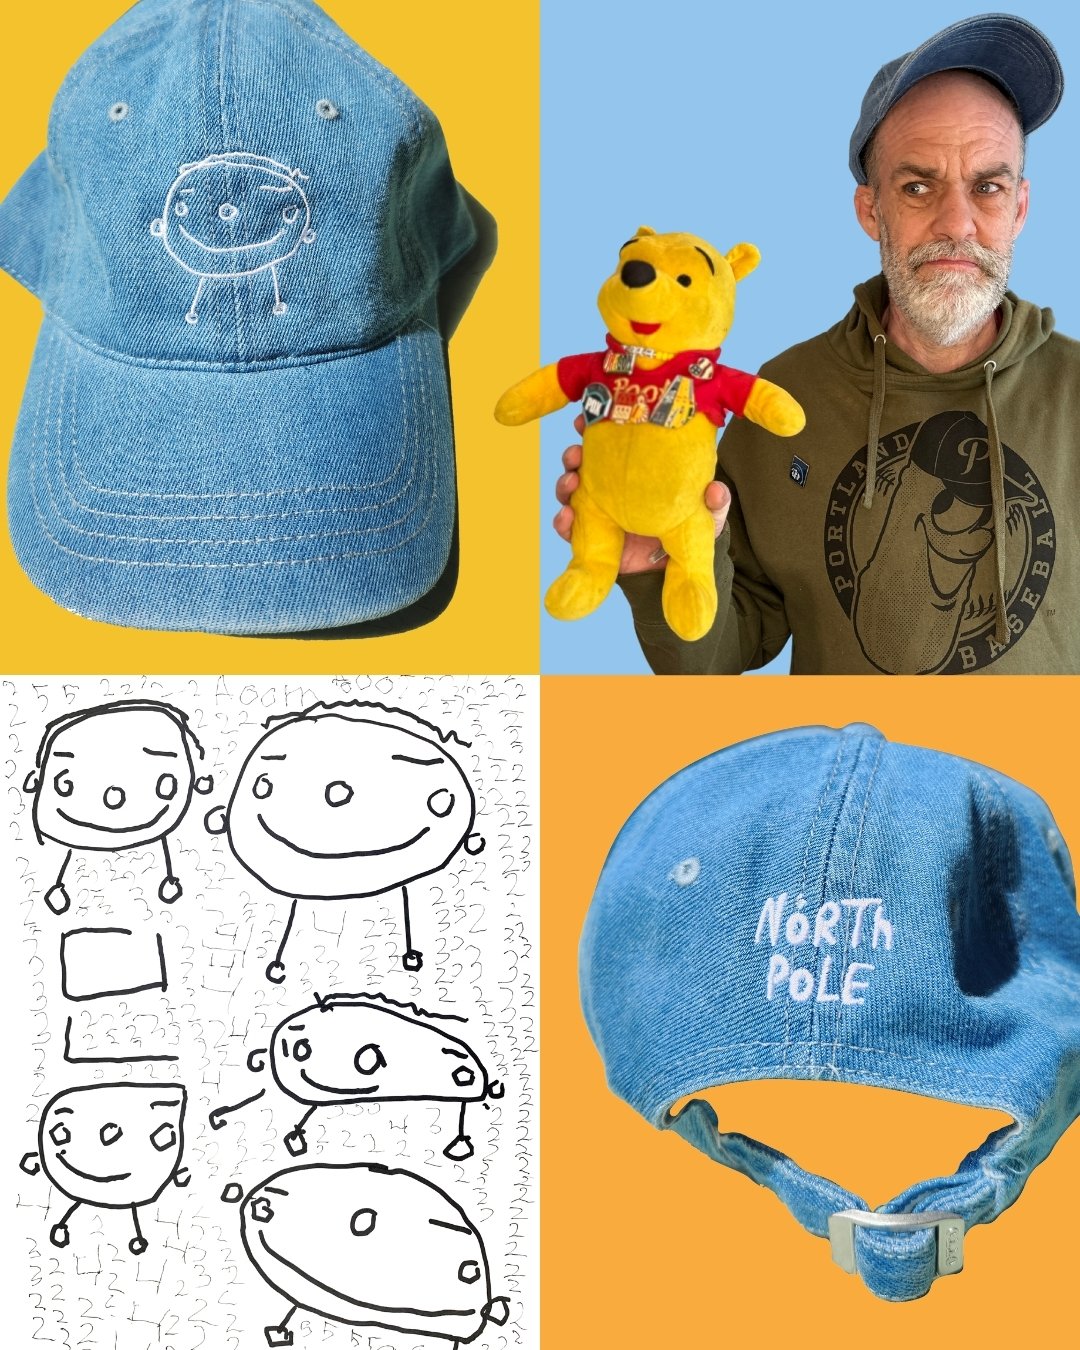 Portland is bloomin' and we are matching the mood with a colorful new mini collection of spring merchandise! 🌷

1: Our staff uniform has become Adam Richards' amazing denim dad hat, which goes with everything and is guaranteed to help turn your down